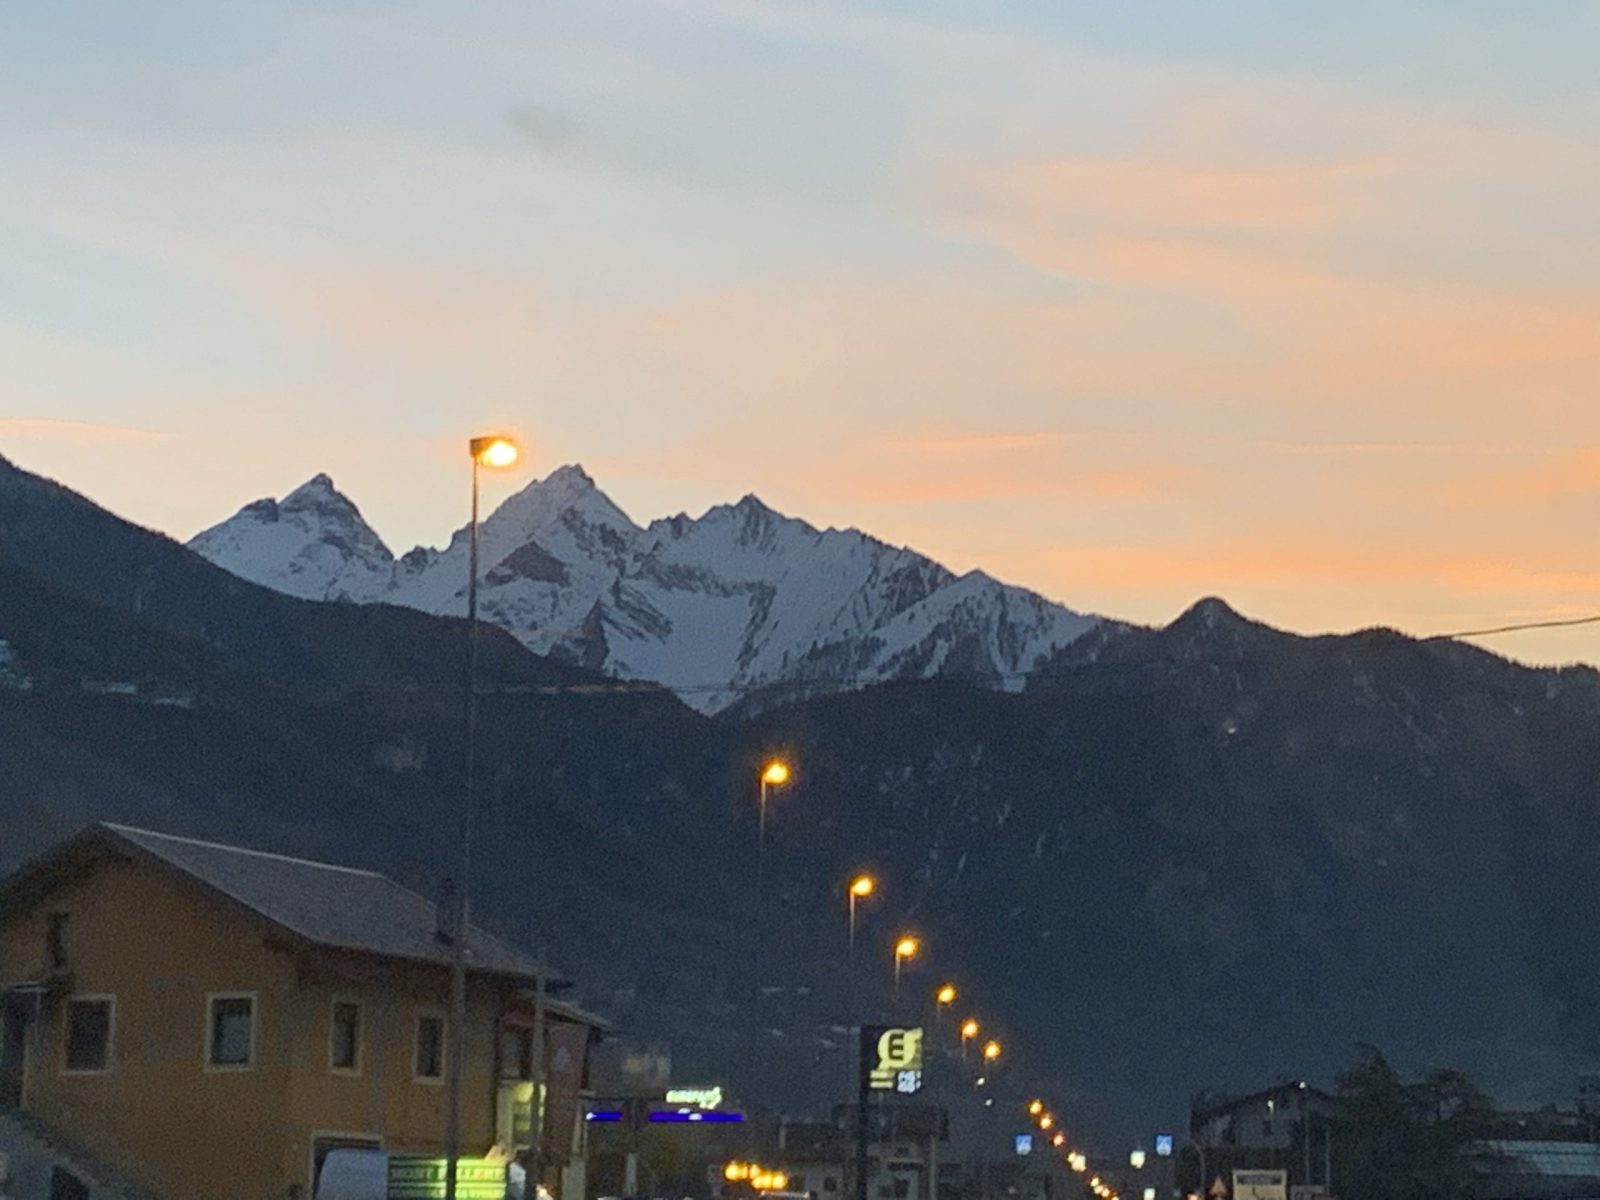 The sun is setting in the mountains coming back from Pila. Our half term ski-safari holiday based in the Valdigne of Aosta Valley- Courmayeur, Pila and La Thuile.